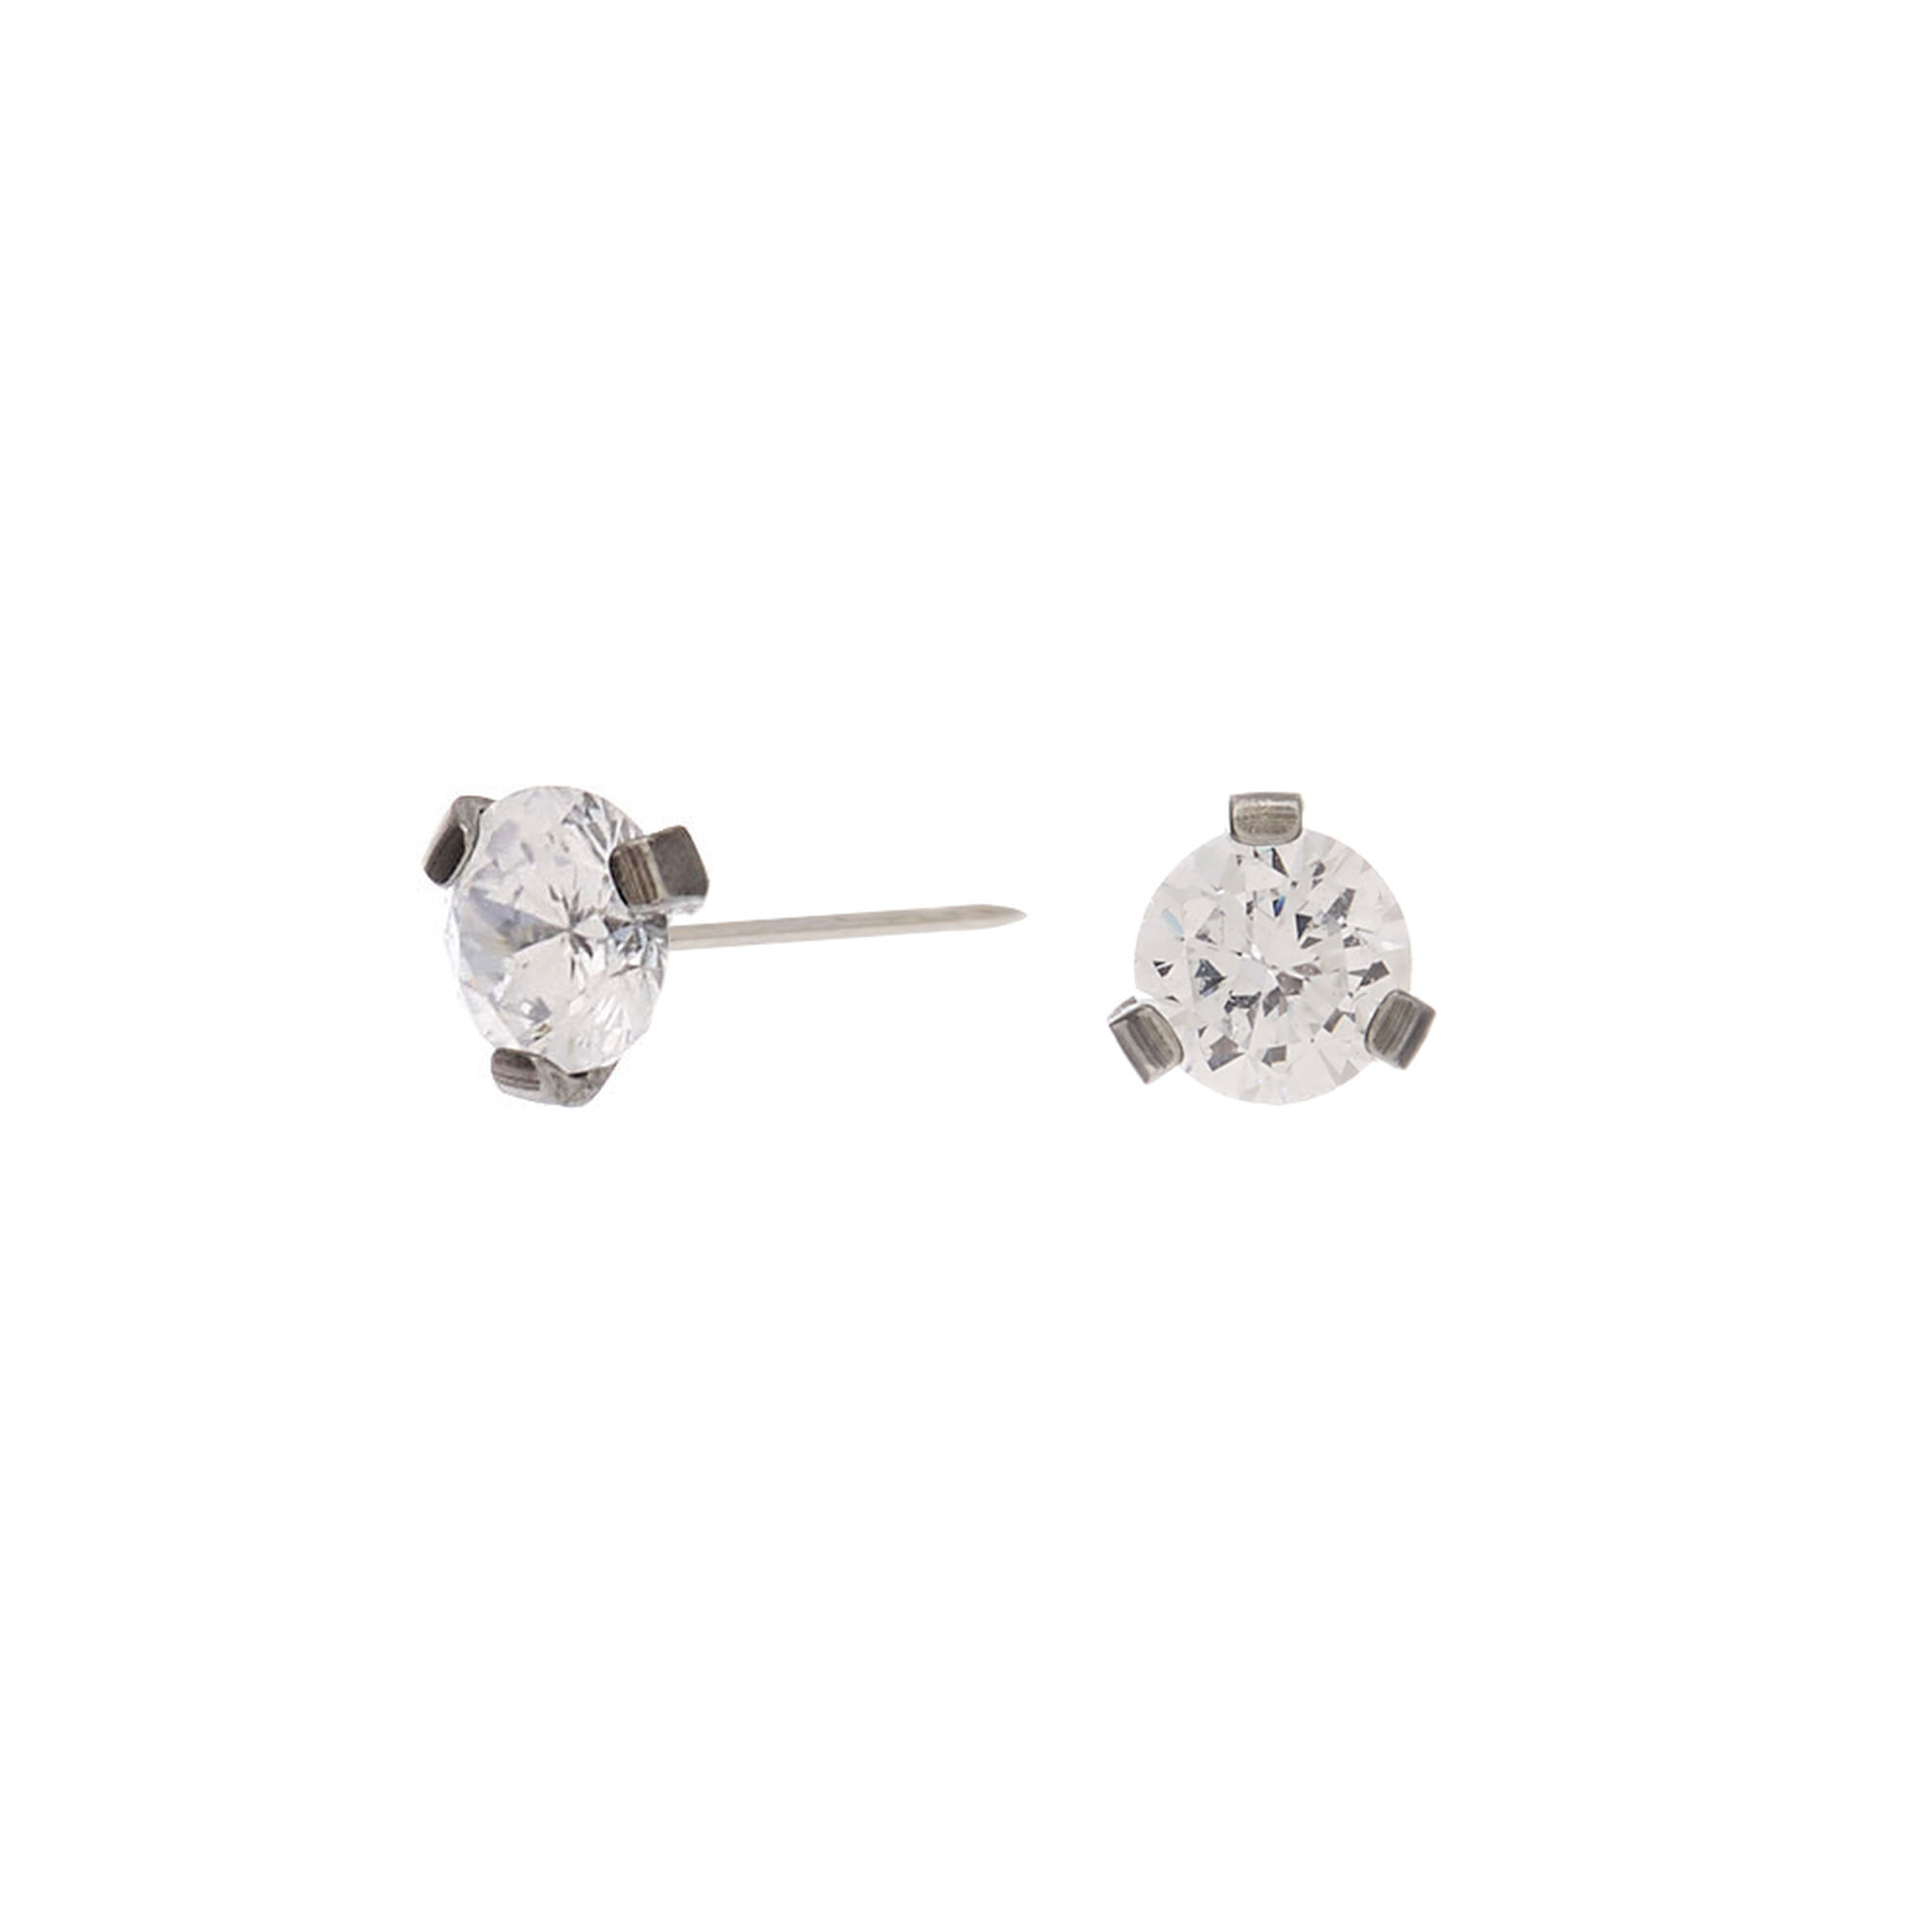 View Claires titanium Cubic Zirconia Round Stud Earrings 4MM Silver information